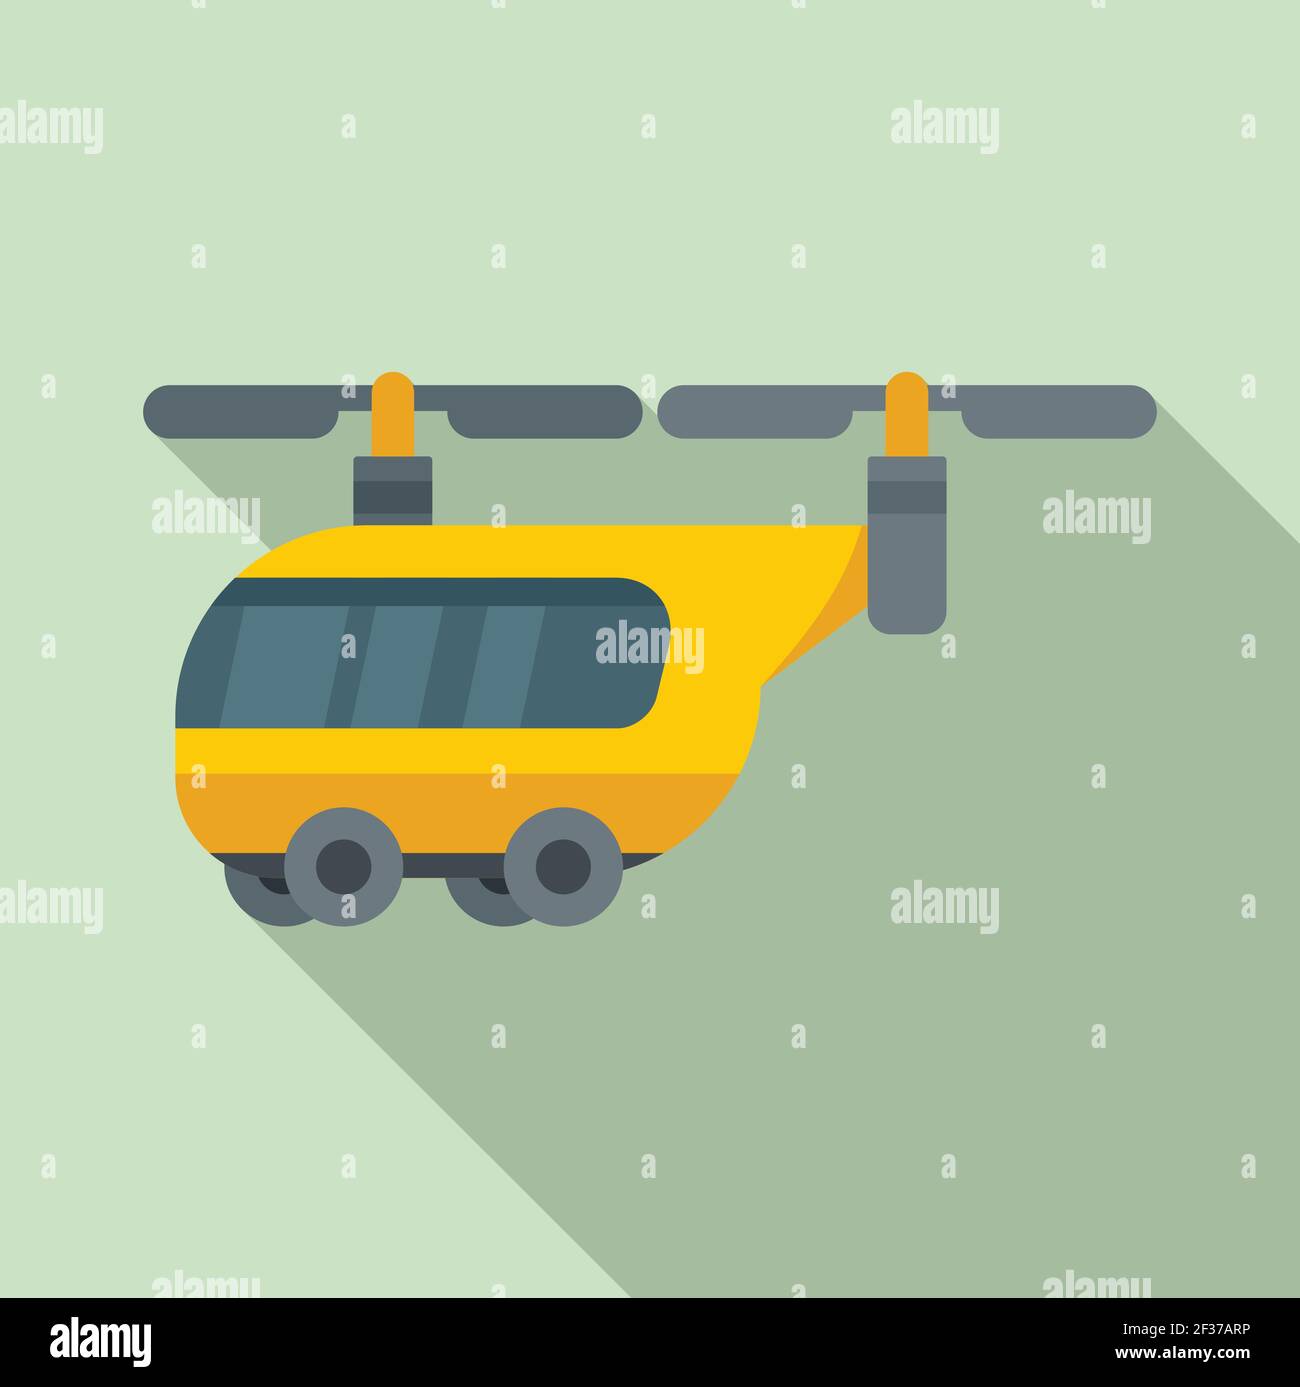 Air taxi bus icon, flat style Stock Vector